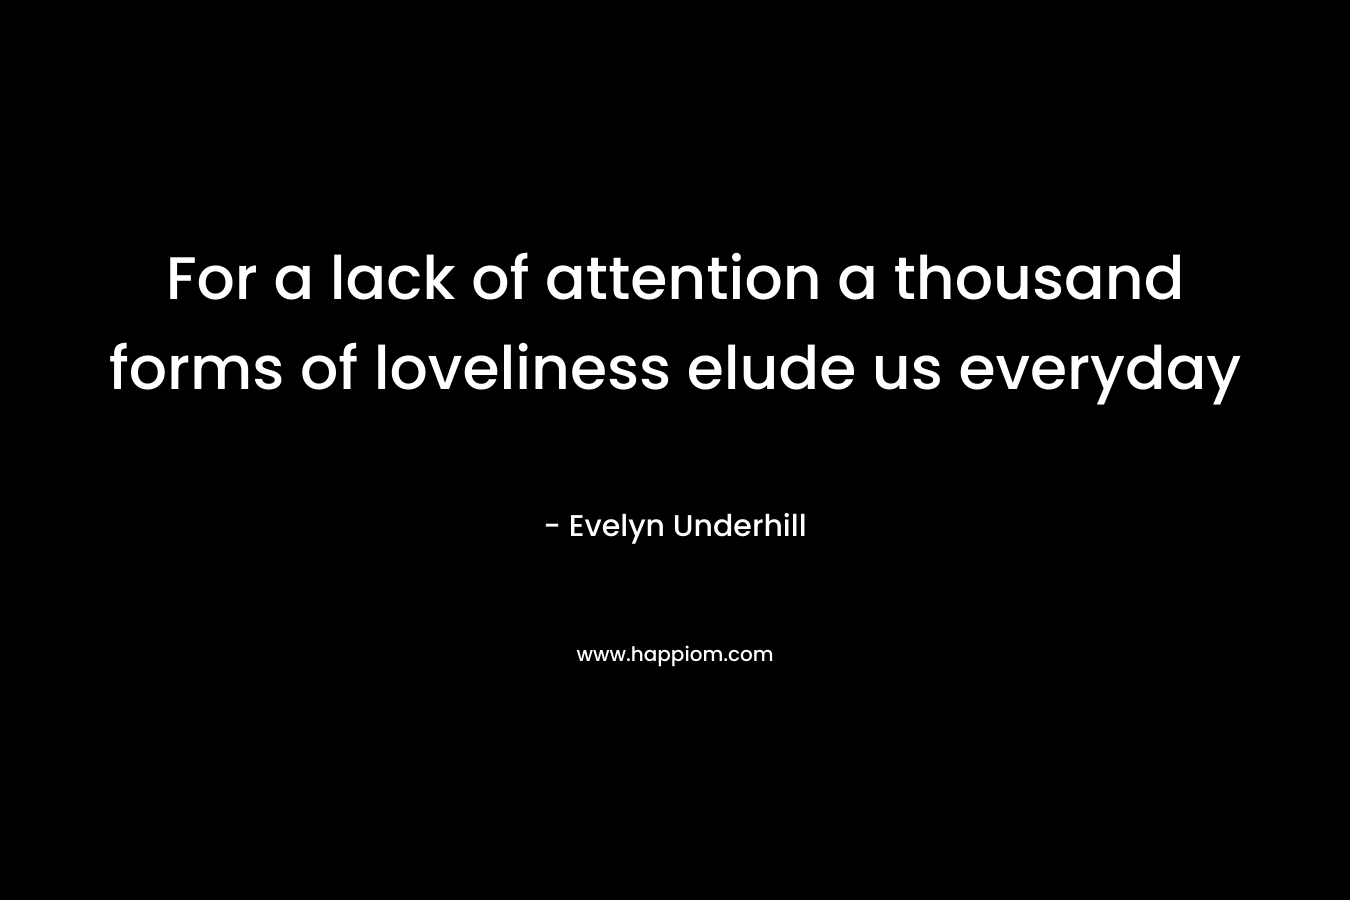 For a lack of attention a thousand forms of loveliness elude us everyday